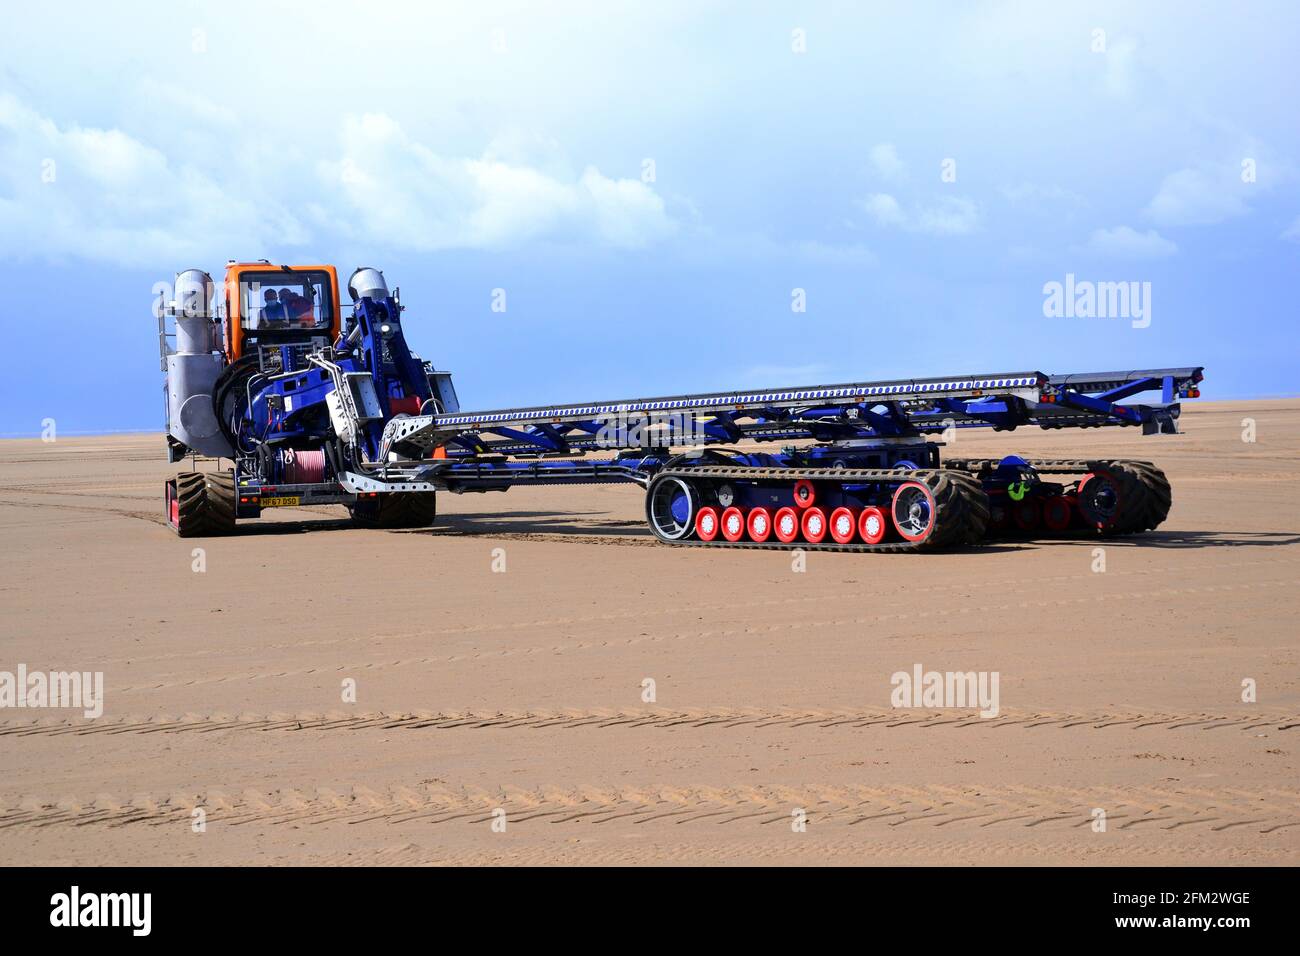 A Shannon Launch and Recovery System, operated by the Royal National Lifeboat Institution on the beach at St Annes On Sea, Fylde, Lancashire, England. Stock Photo